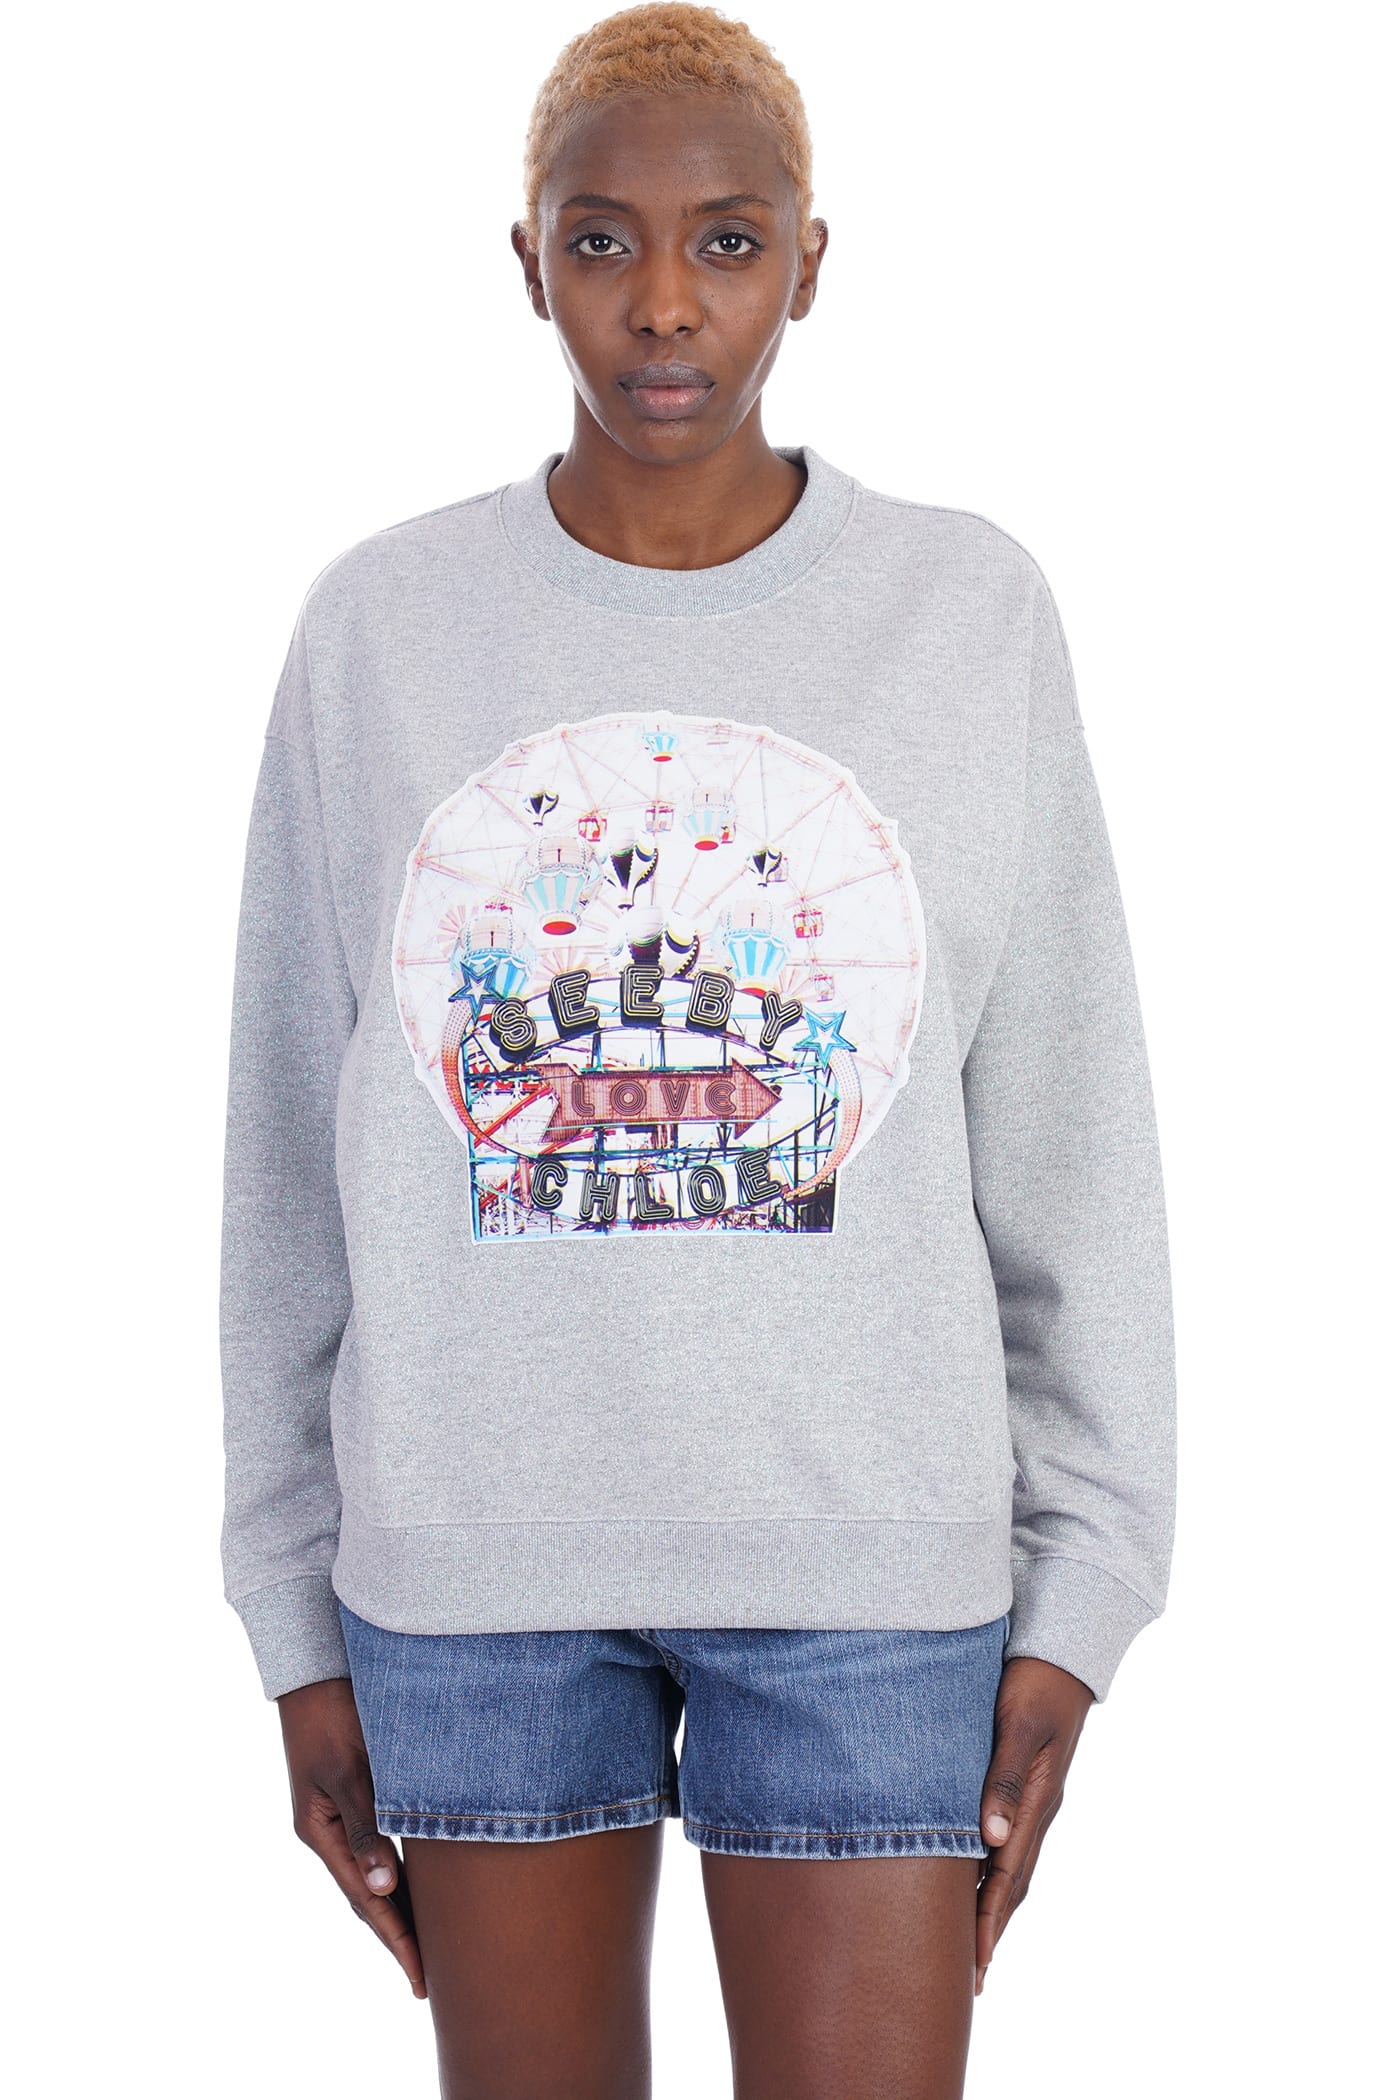 SEE BY CHLOÉ SWEATSHIRT IN GREY COTTON